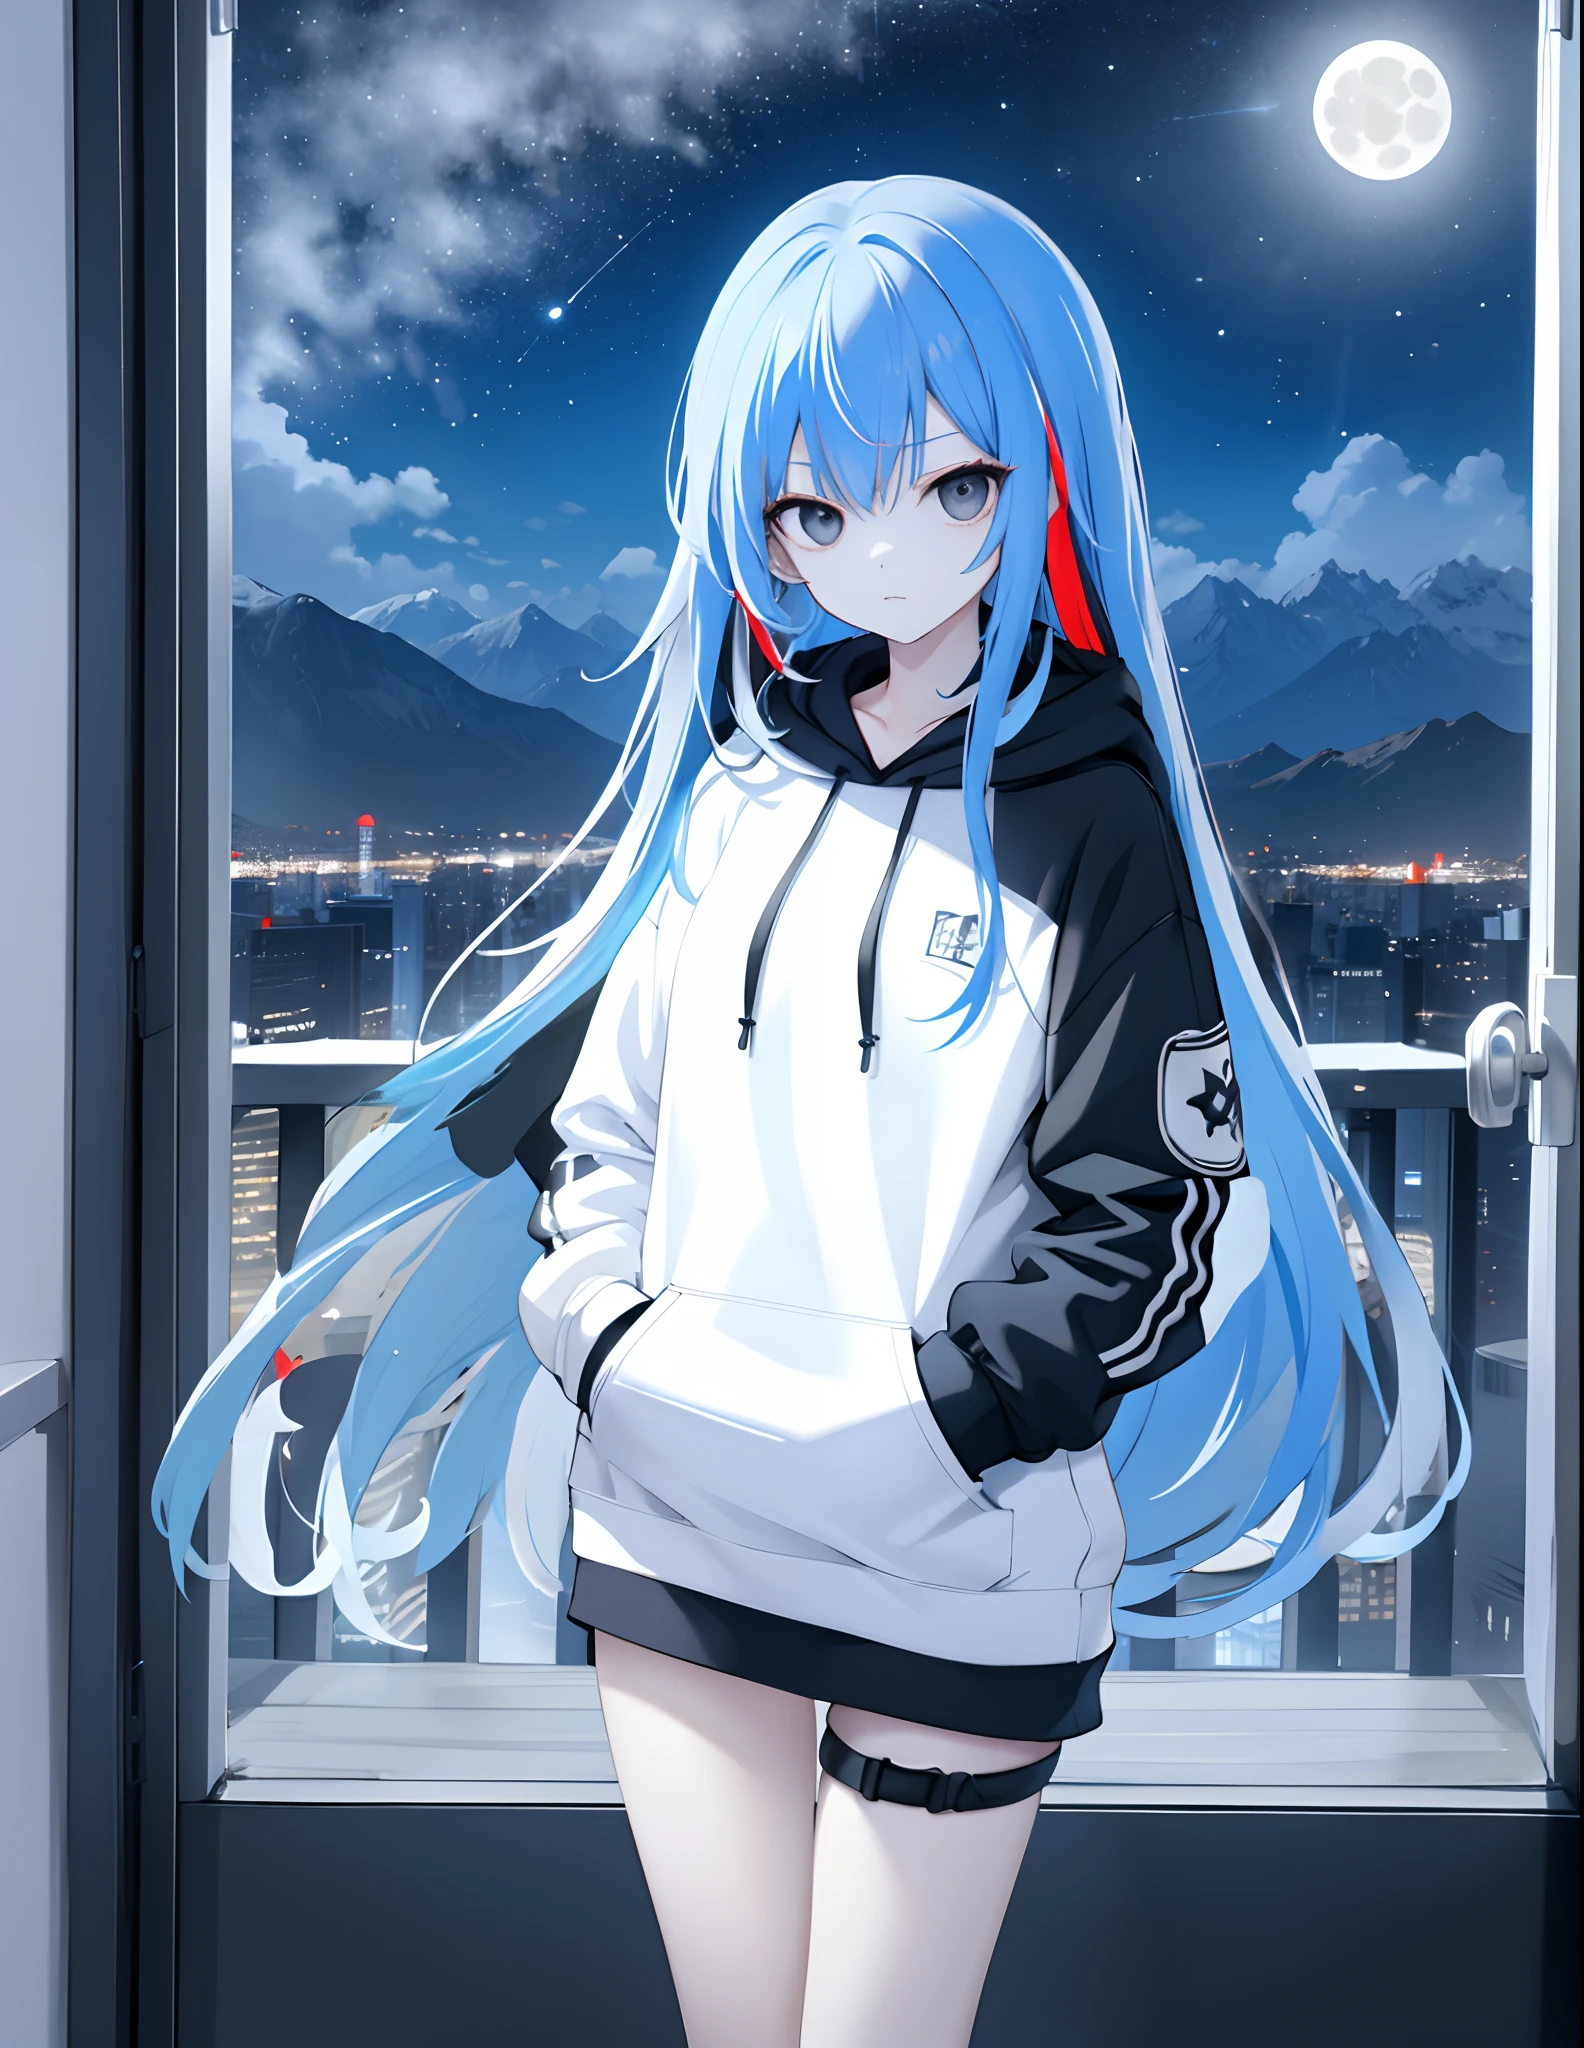 Best Quality,masutepiece,1girl in,Teenage,Full body,(Black eyes:1.1),close-up,Very long hair,Straight hair,side locks,Solo,Hoodie,(split-colored hair:1.2),(Black and white pantyhose:0.8),Hands in pockets,(Looking at Viewer:1.2),deadpan,break knight,fullmoon,Cityscape,(mansion:1),(highrise buildings:1),(nigh sky:1.1),skyporn,Starry sky,mountain road,Street,City lights,door,window,